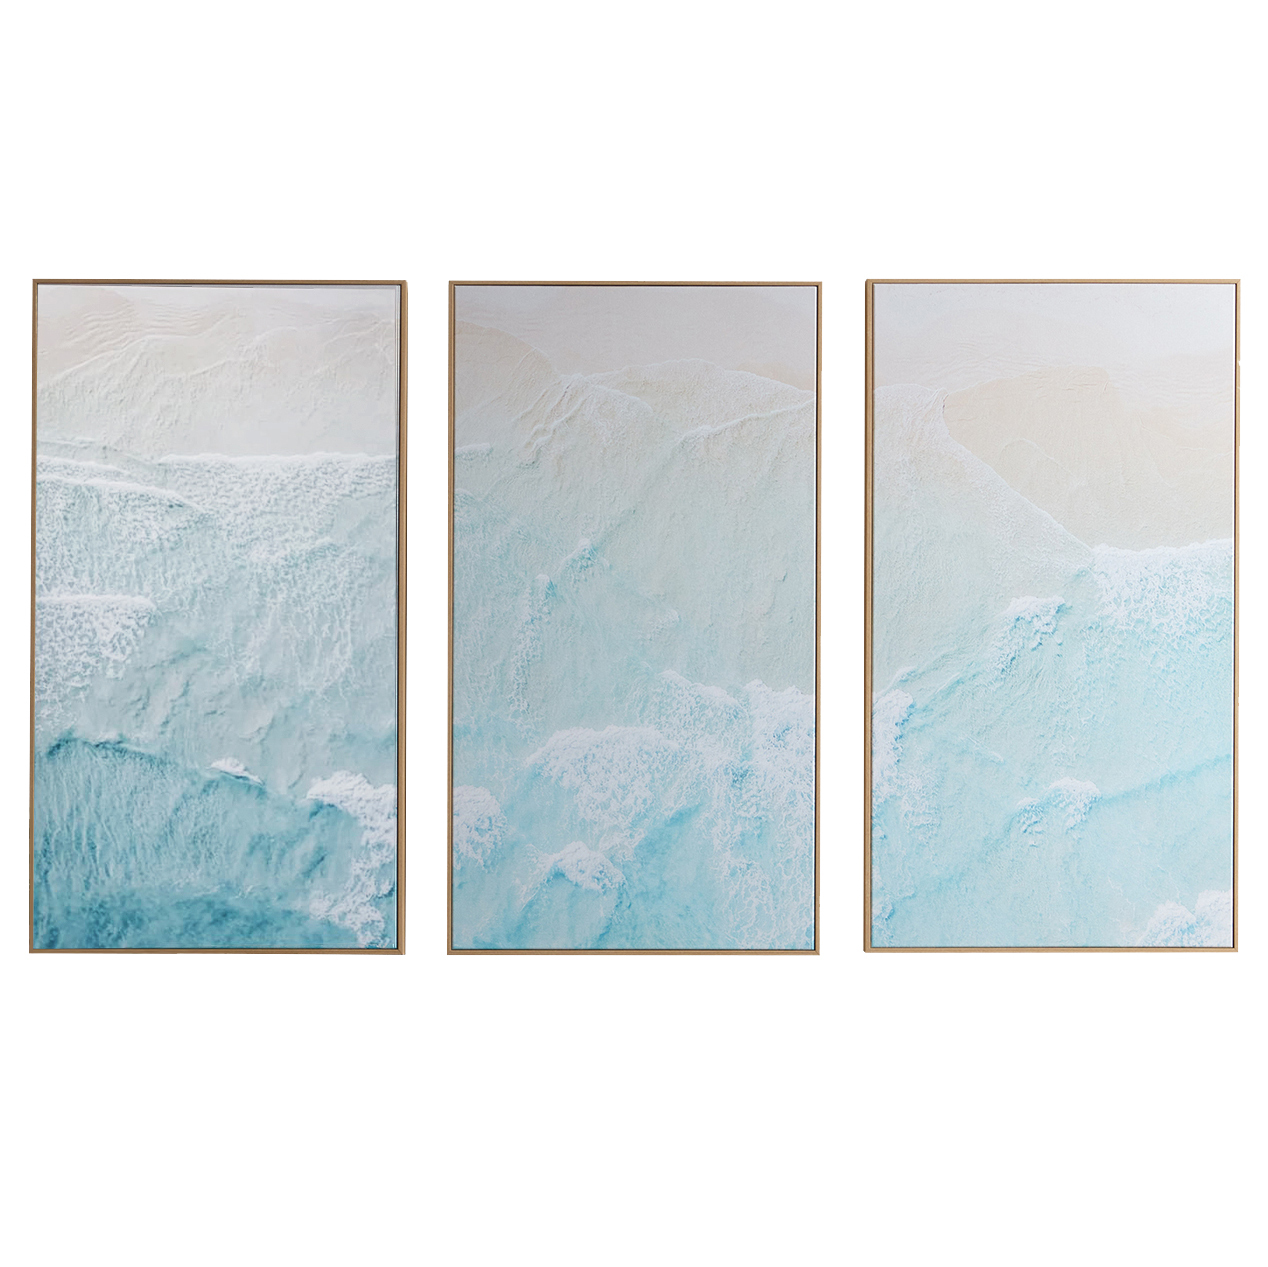 Temple Webster Turquoise Surf Framed Canvas Wall Art Triptych Reviews